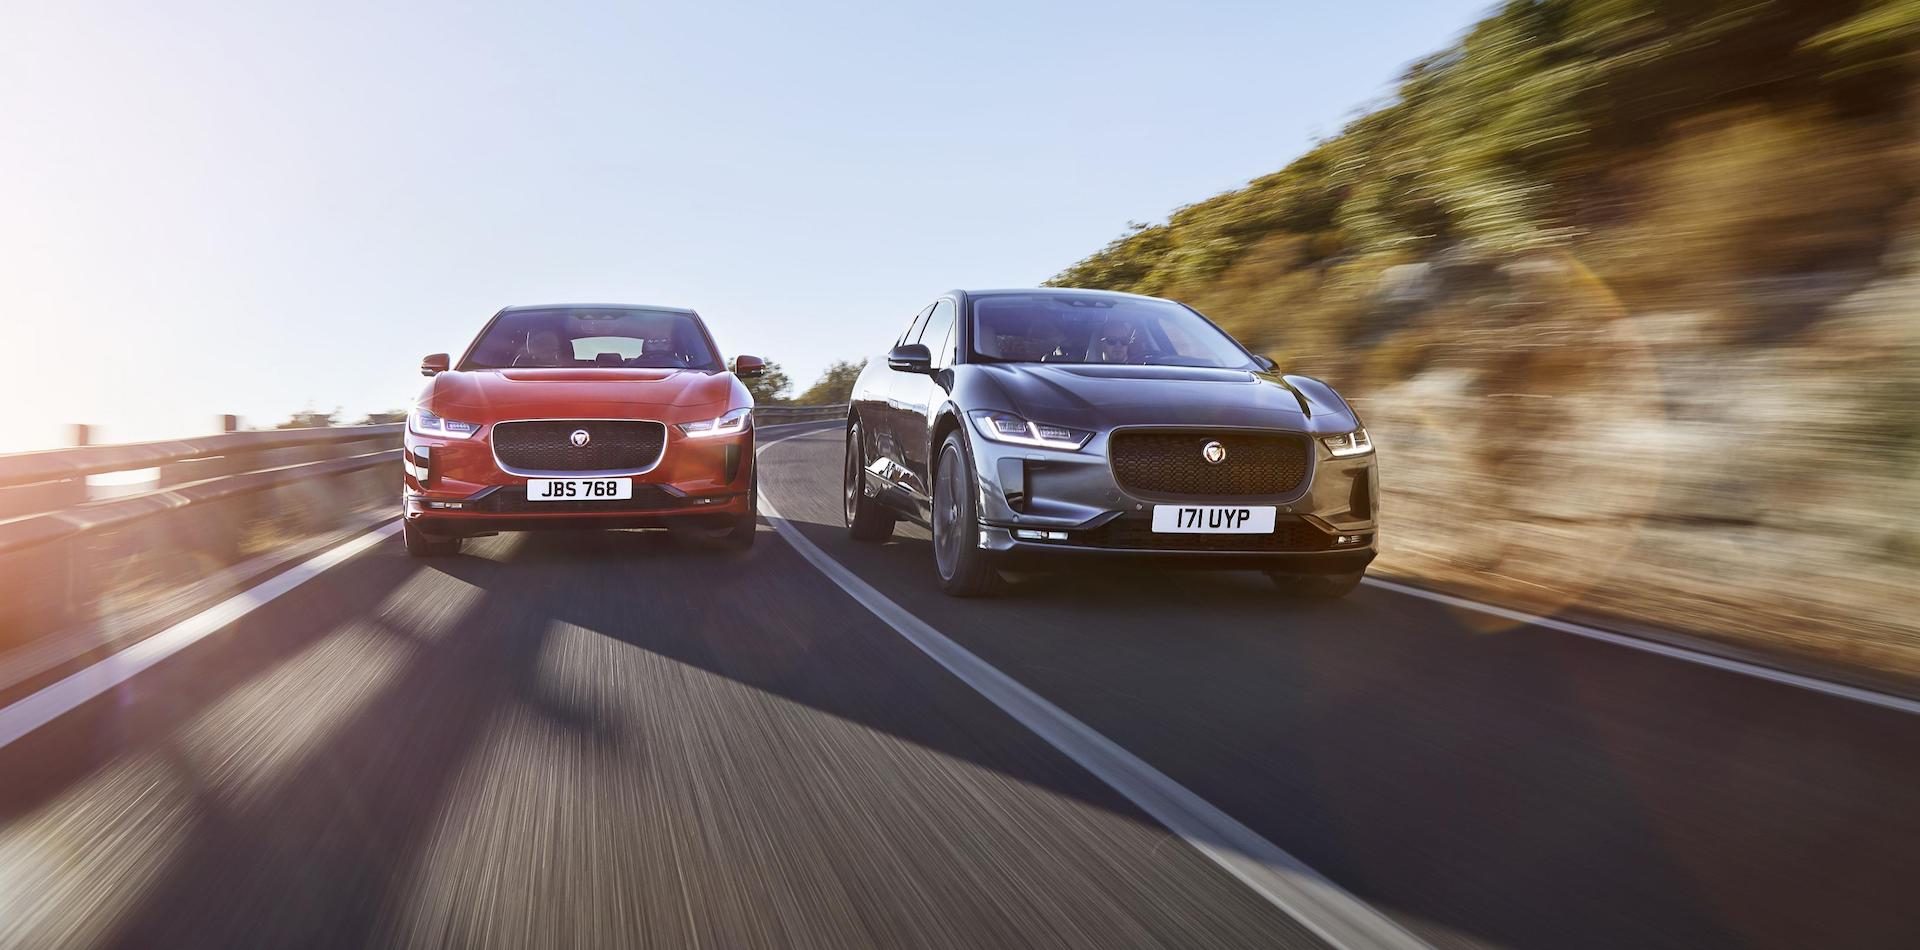 The new Jaguar i-Pace is available to order now